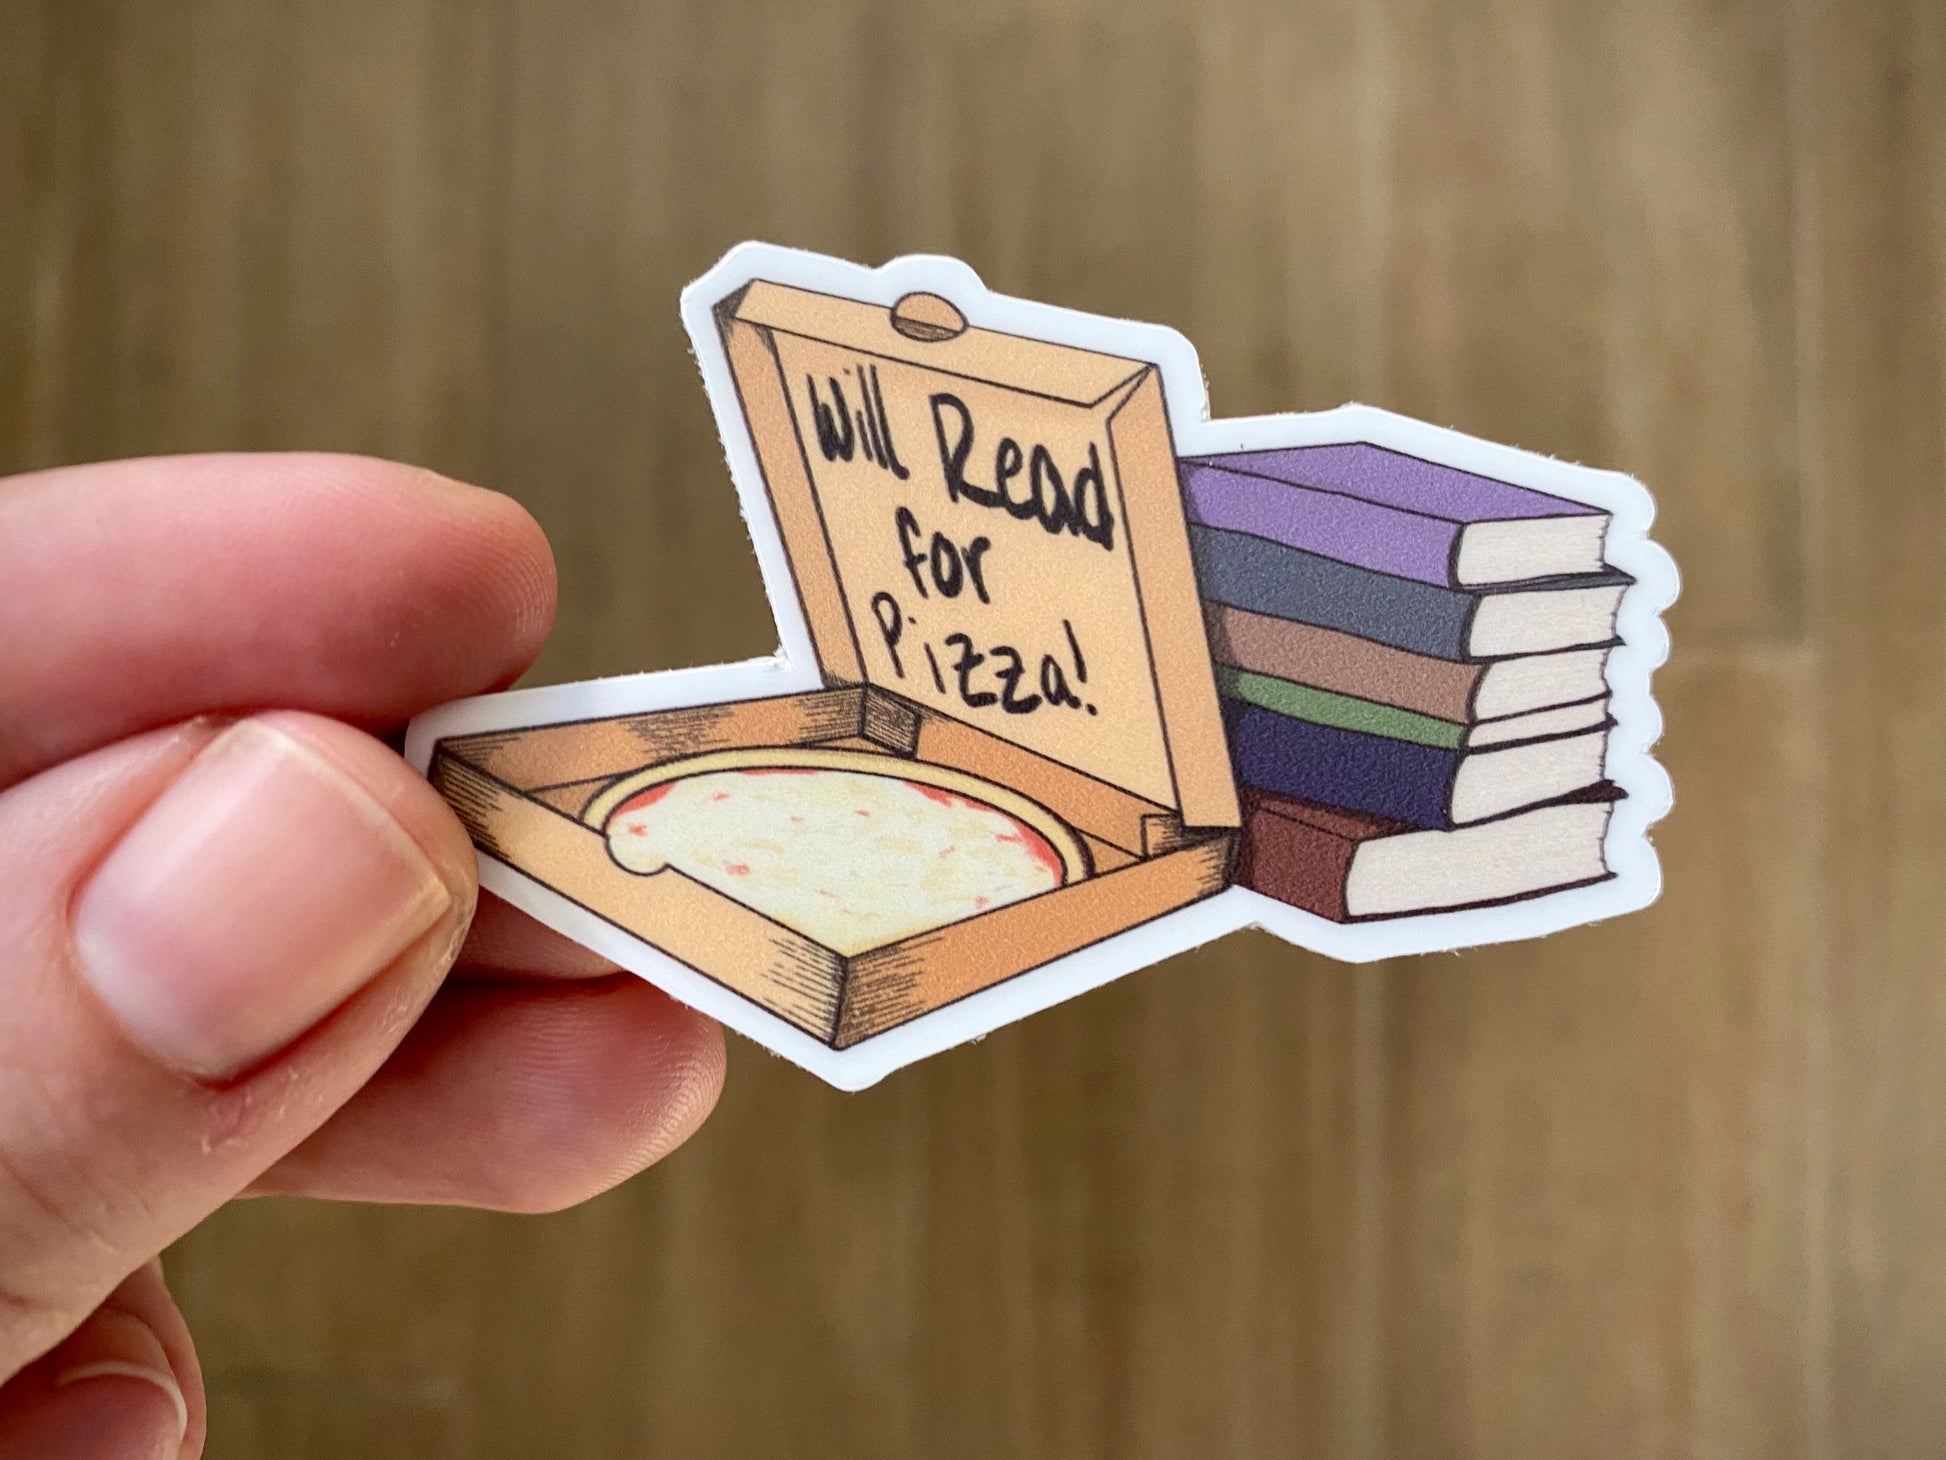 hand holding a sticker showing a pizza box with a stack of books with text "will read for pizza" 